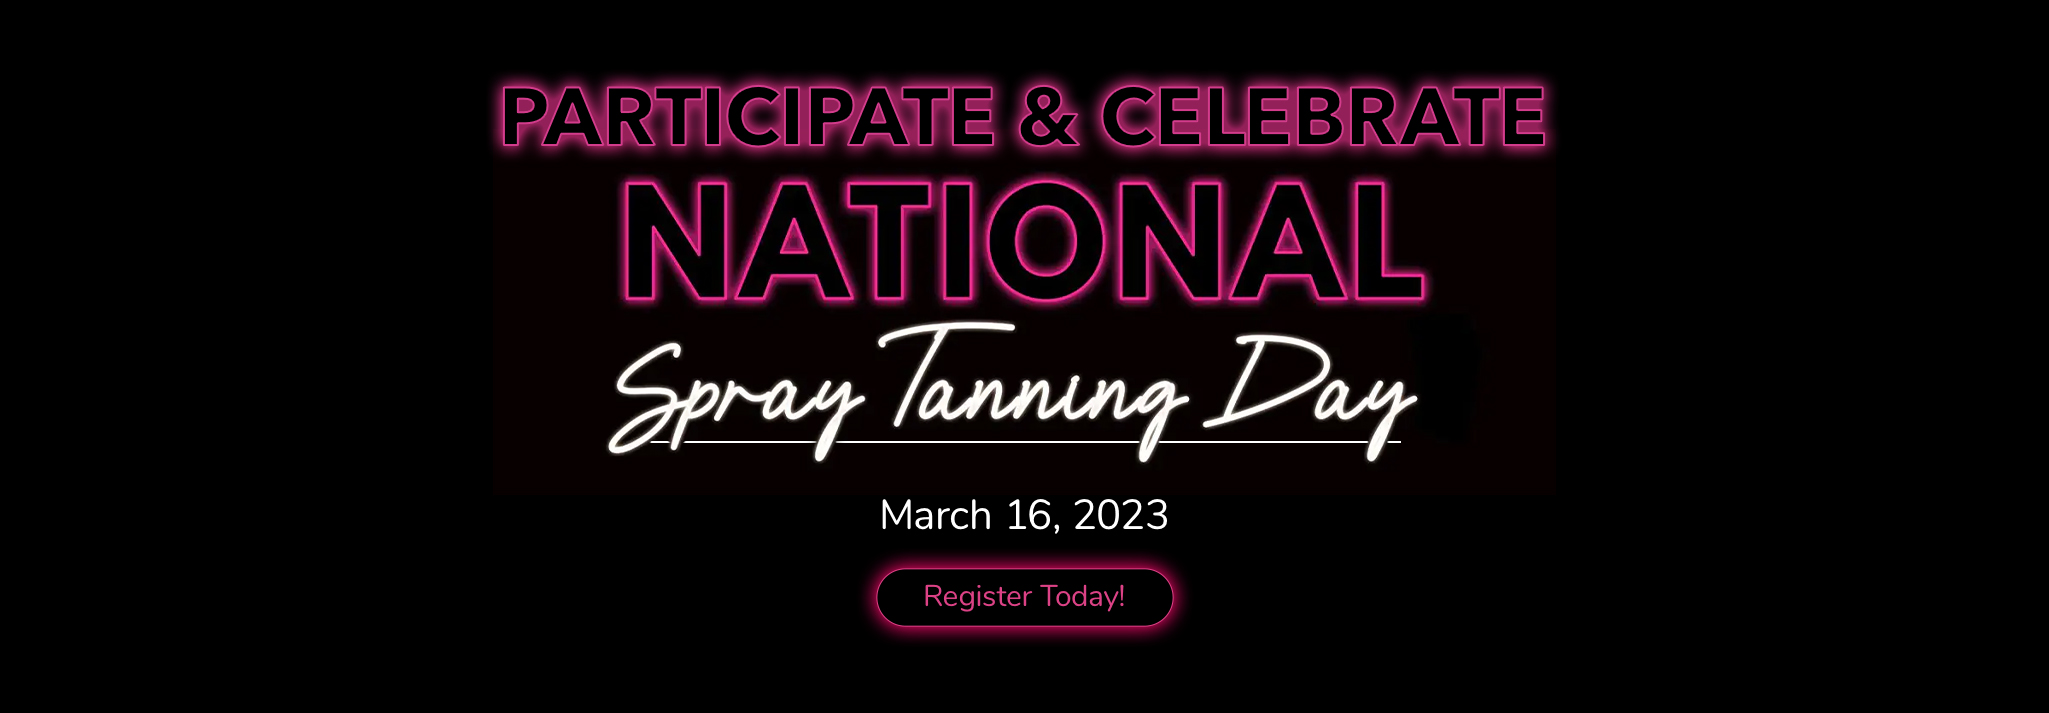 Participate & Celebrate National Spray Tanning Day